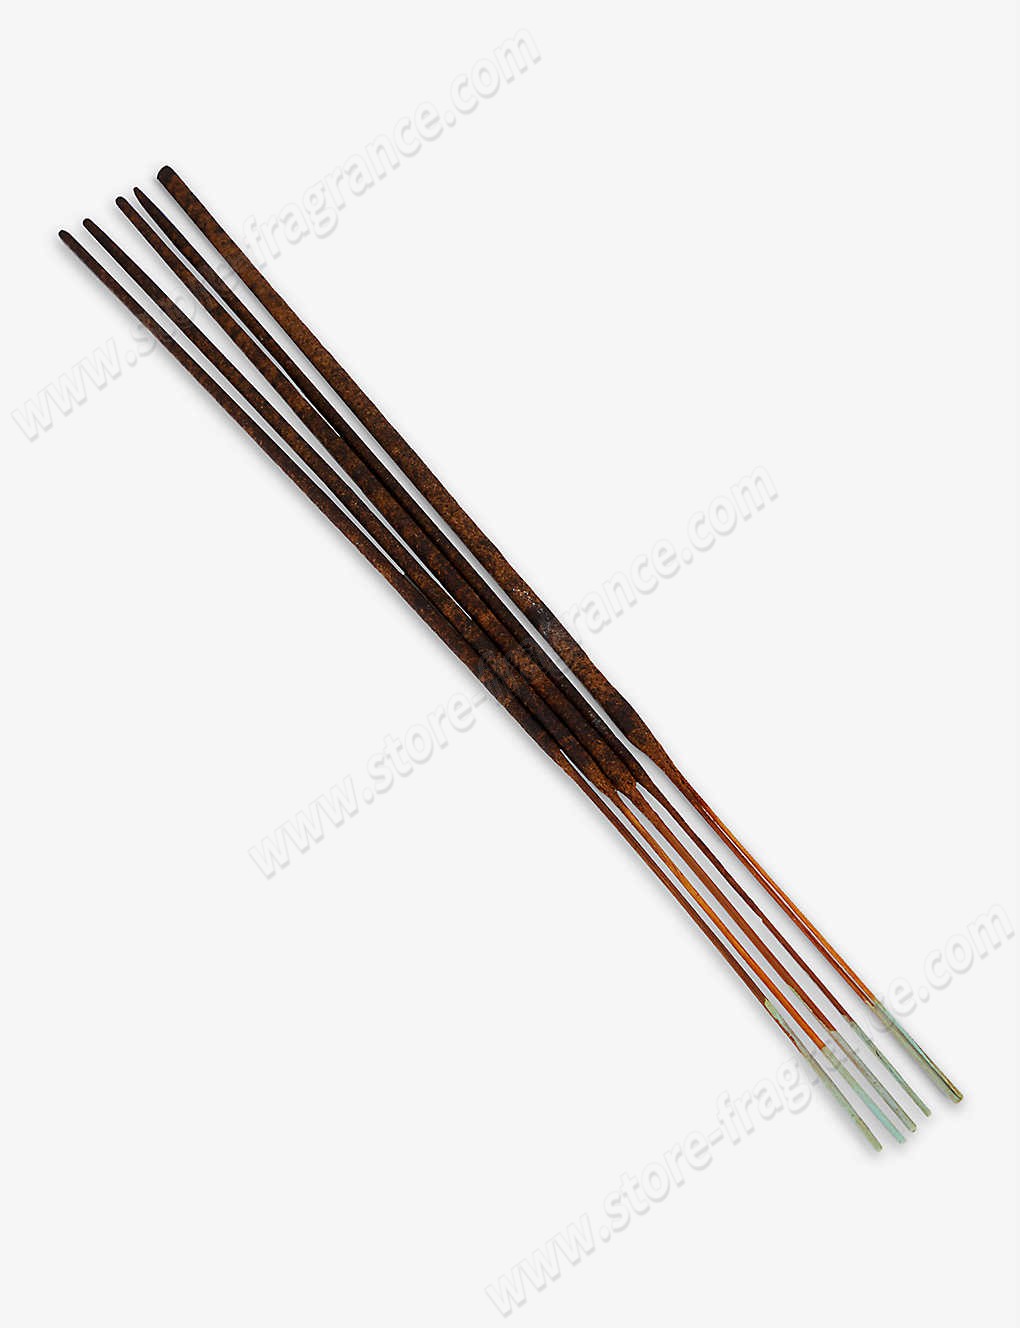 CURVES BY SEAN BROWN/Wild Berry wooden incense sticks pack of 20 Limit Offer - -3